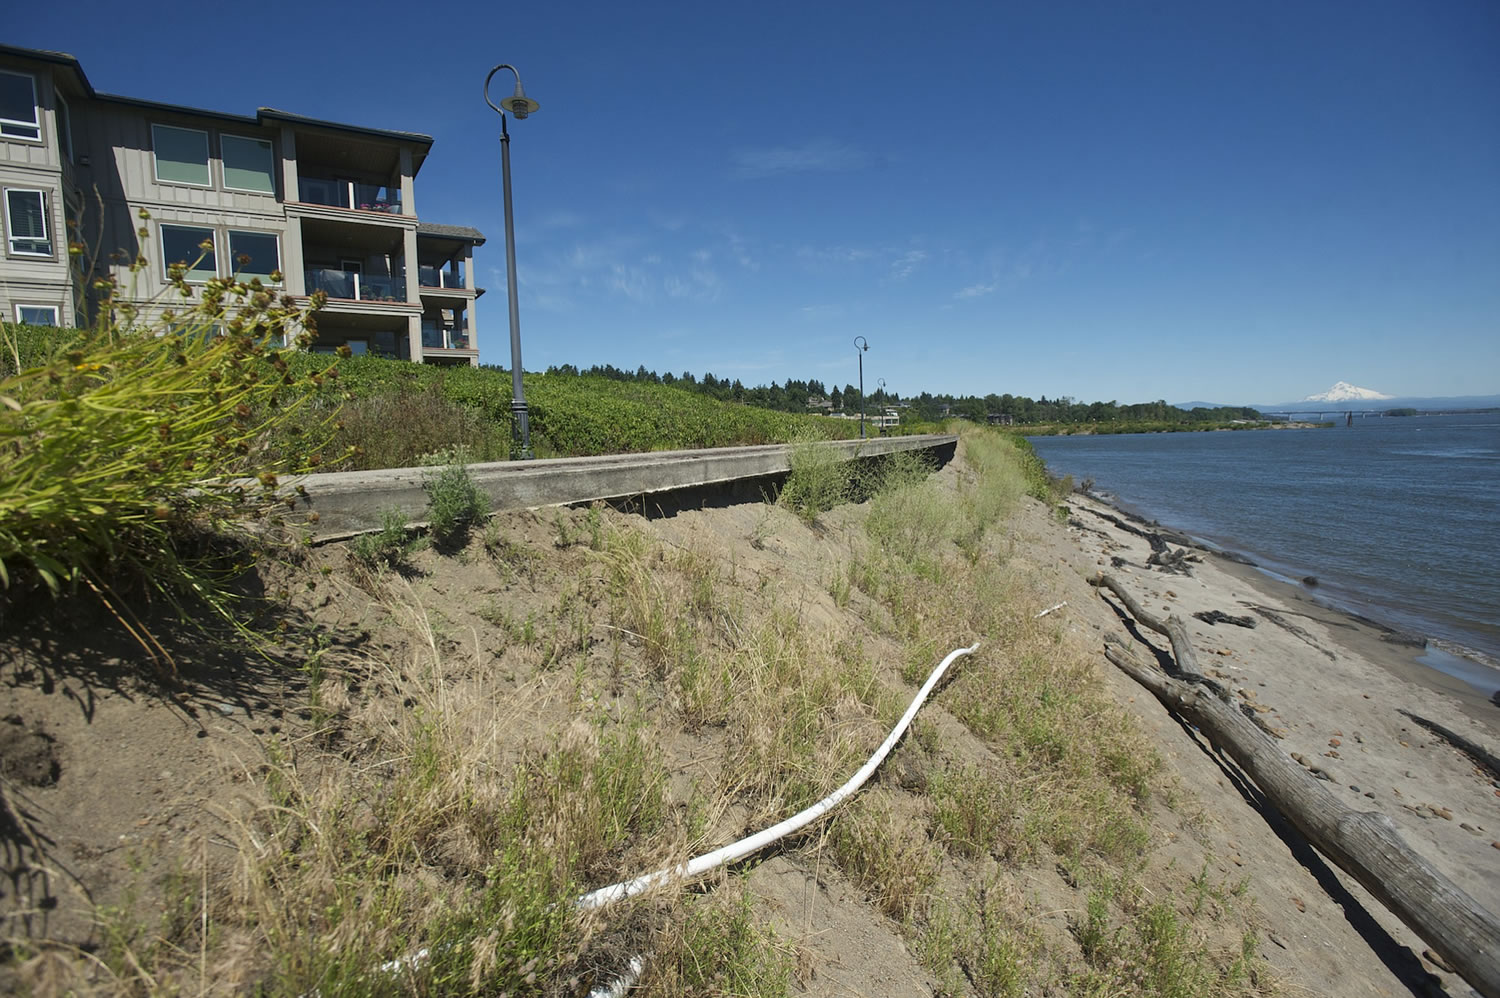 A portion of the Waterfront Renaissance Trail, which runs in front of the Tidewater Cove condominiums, was closed in 2011 after high river levels destabilized the slope. The Vancouver City Council has appropriated $2 million to finish fixing the trail, and work should start in September.